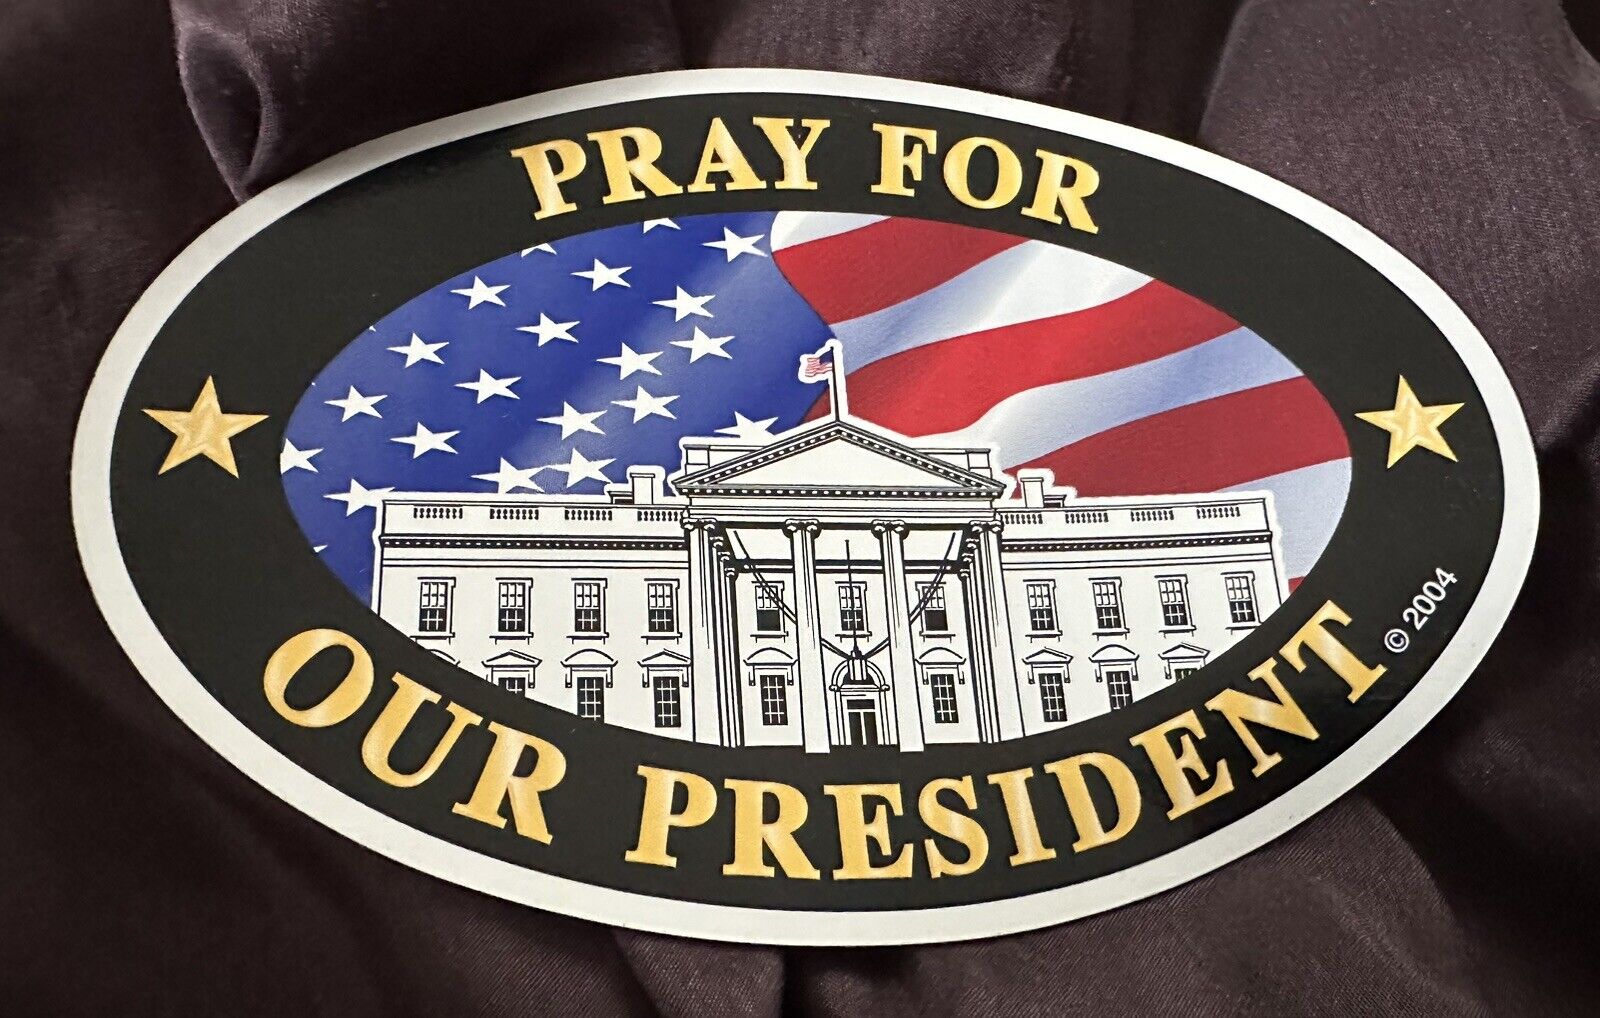 Large Pray For Our President Oval Magnet Support USA NEW